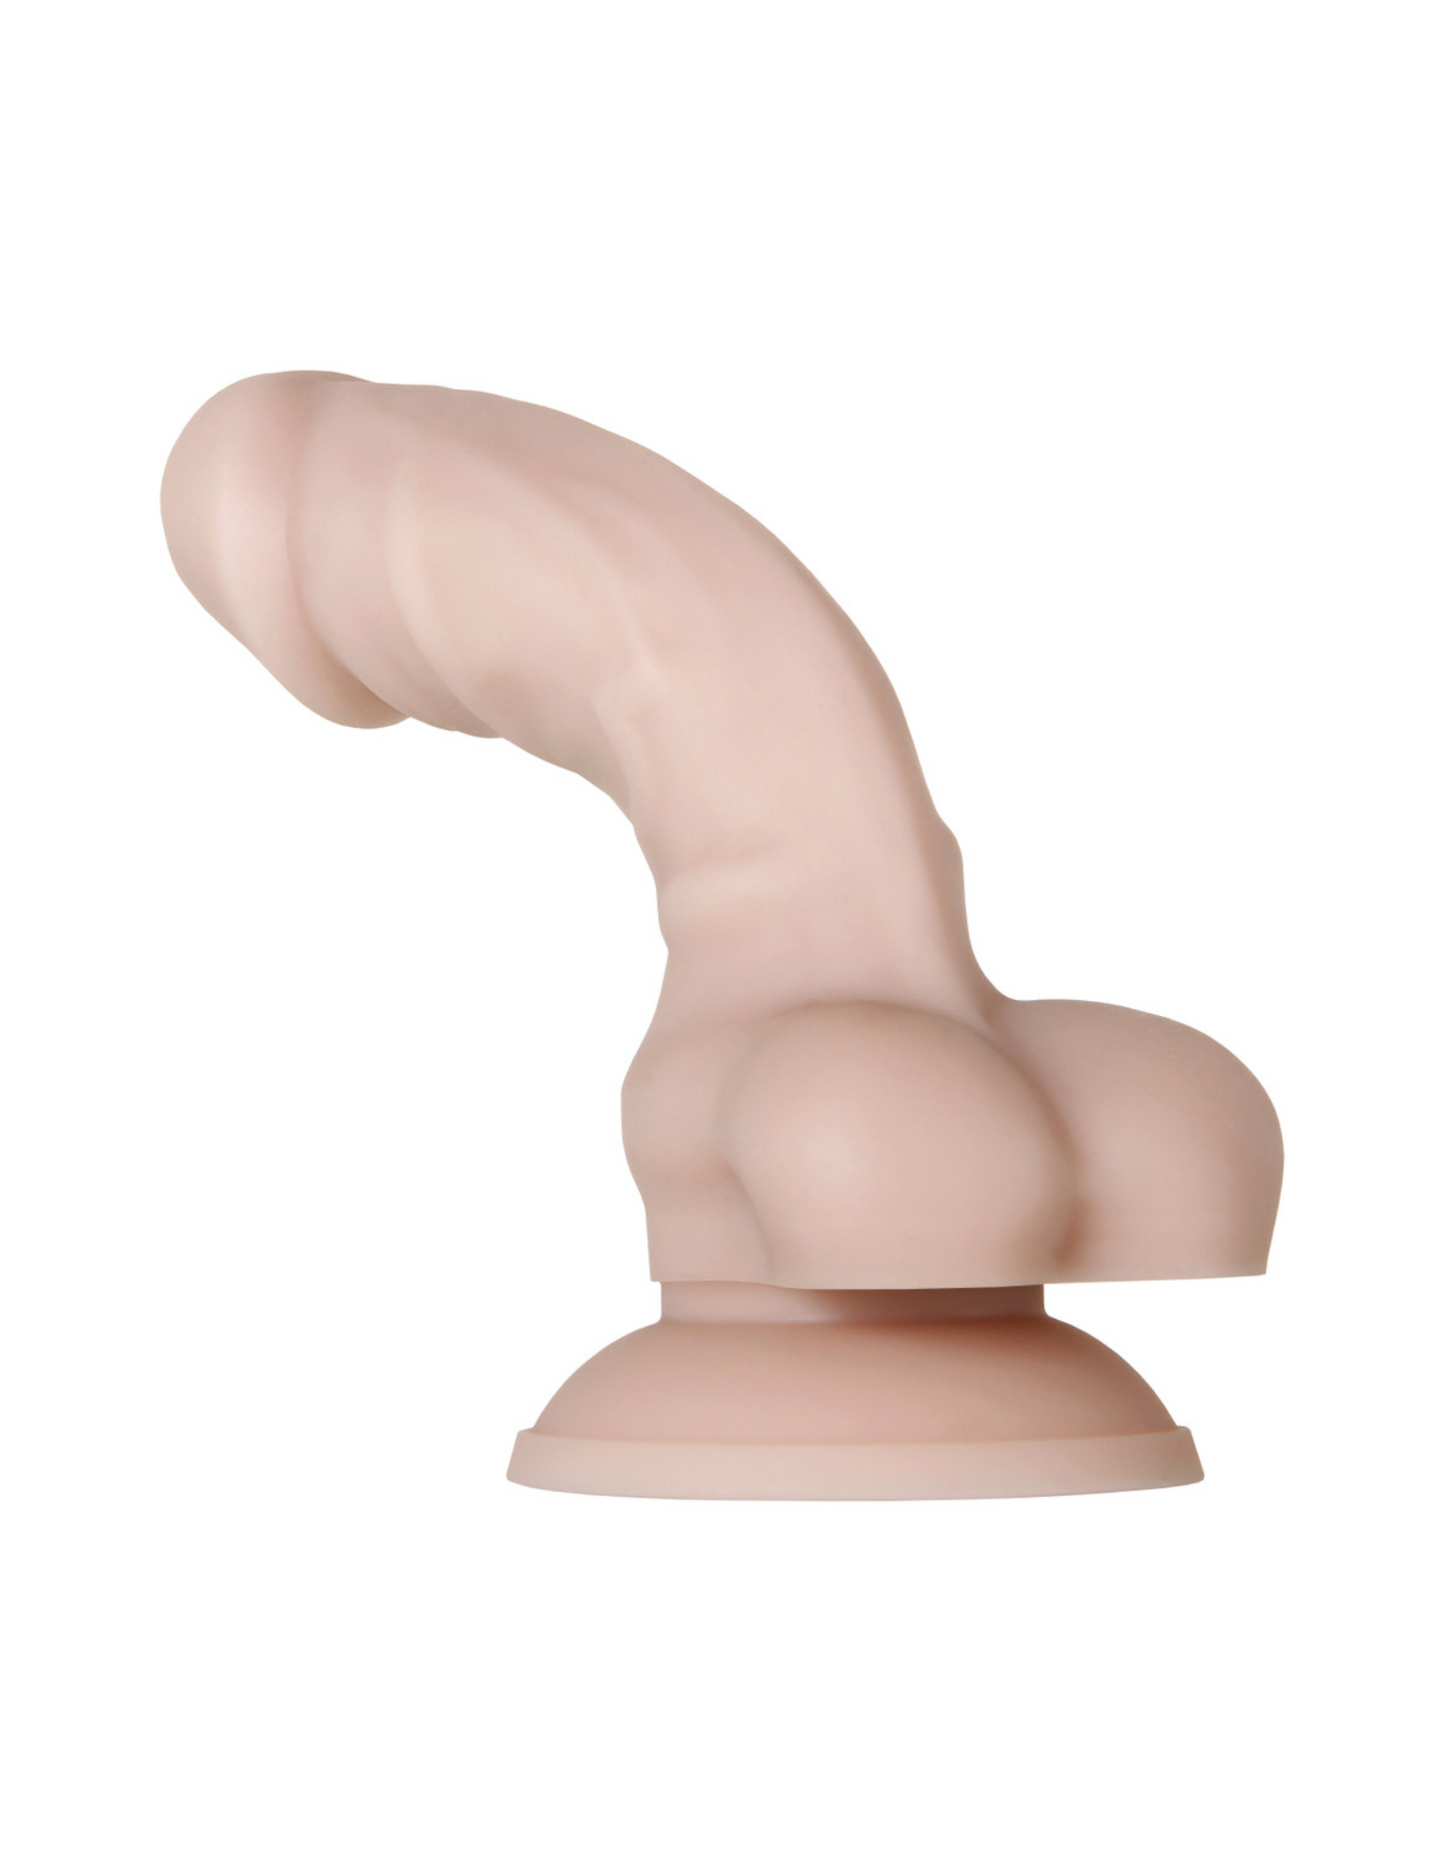 Images shows the Real Supple Silicone Poseable Dildo w/ Balls from Evolved Novelties (6in, light) bending backward to shows its flexibility.